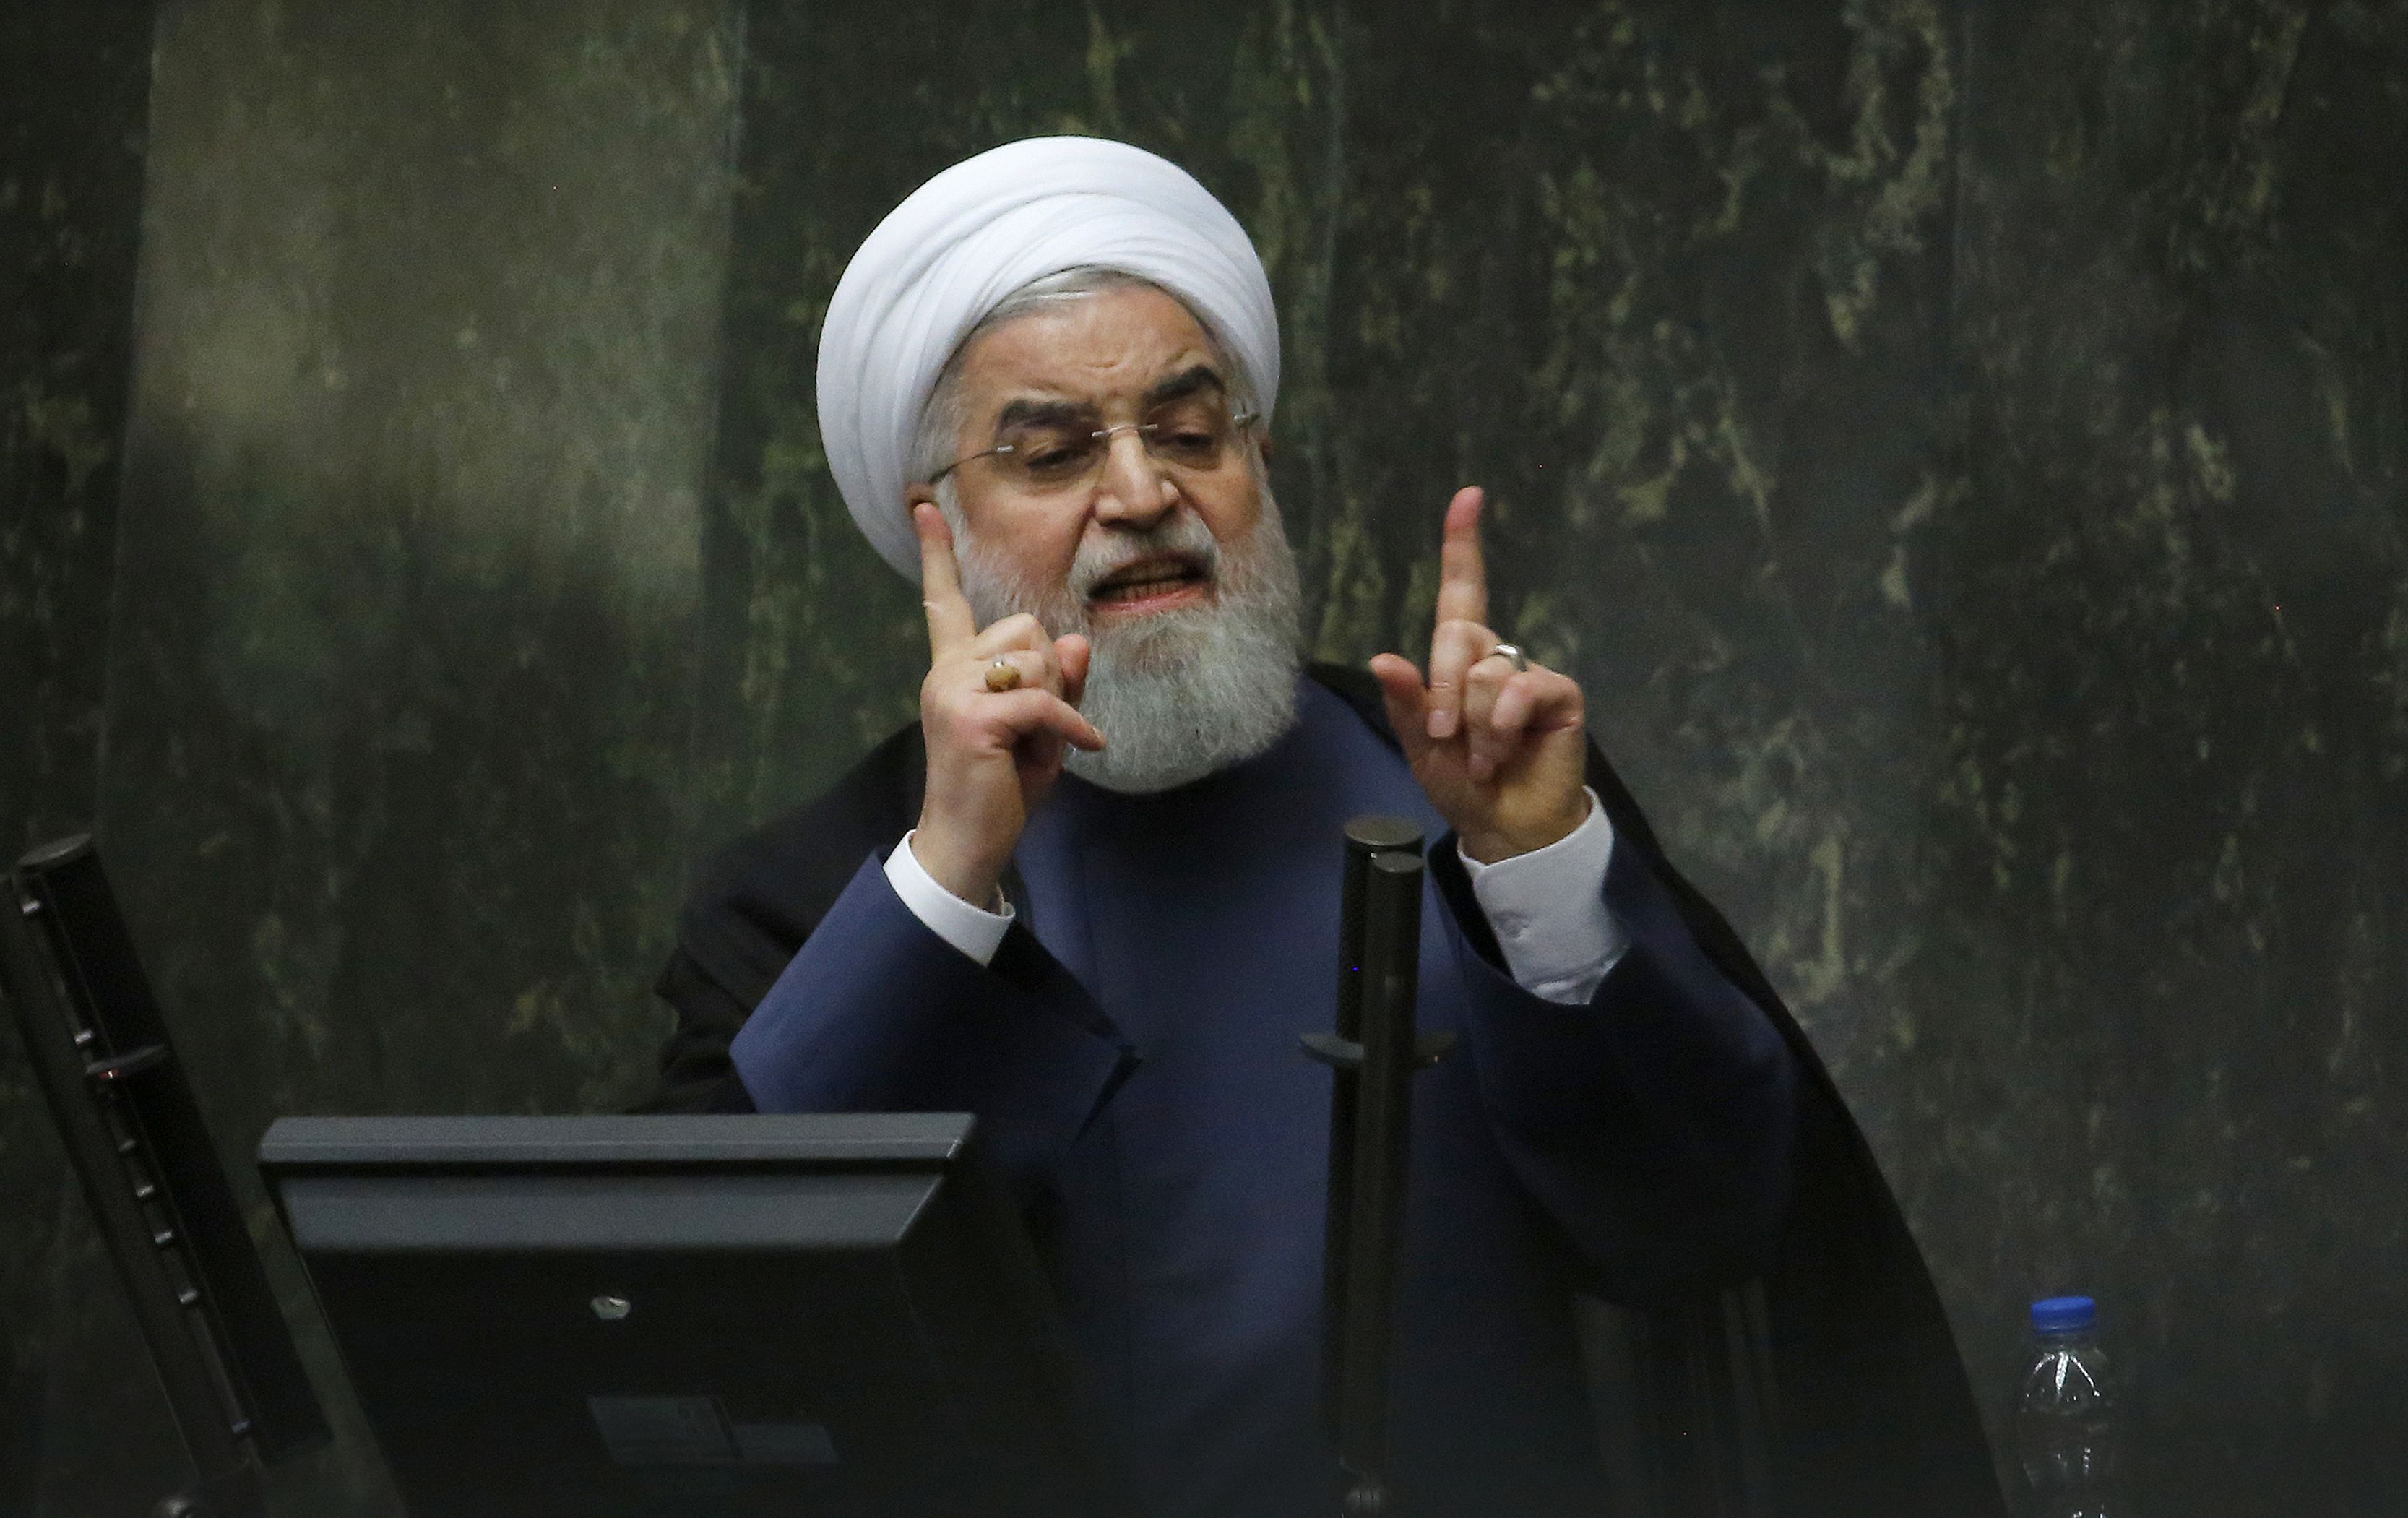 President Hassan Rouhani speaks at the Iranian Parliament in the capital Tehran, on August 28, 2018. It was the first time Rouhani had been summoned by parliament in his five years in power, with MPs demanding answers on unemployment, rising prices and the collapsing value of the rial, which has lost more than half its value since April. (Atta Kenare—AFP/Getty Images)